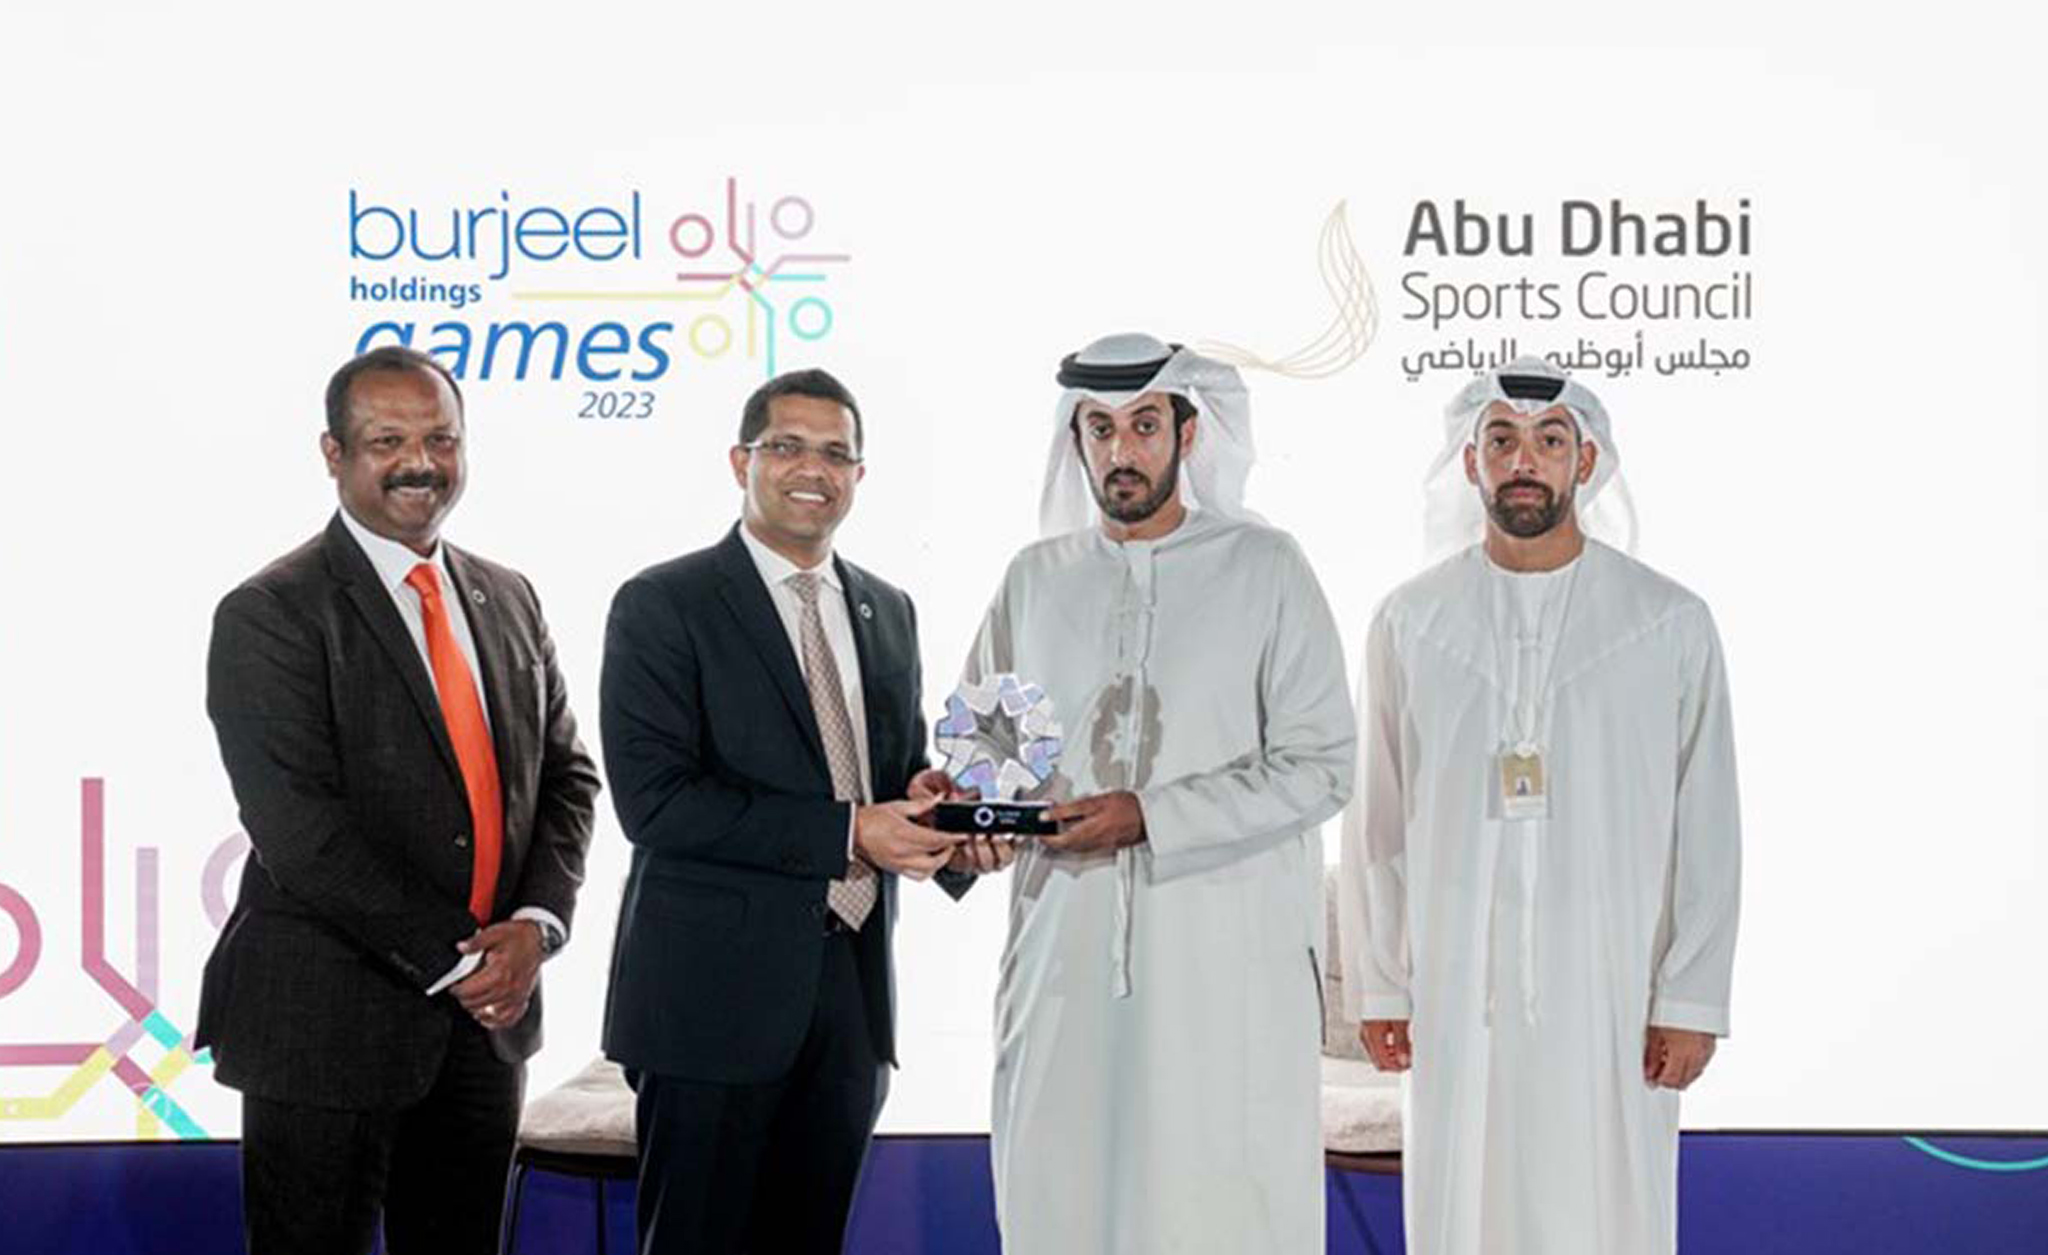 Burjeel Games 2023 draws over 1,100 healthcare workers for the competition from March 24